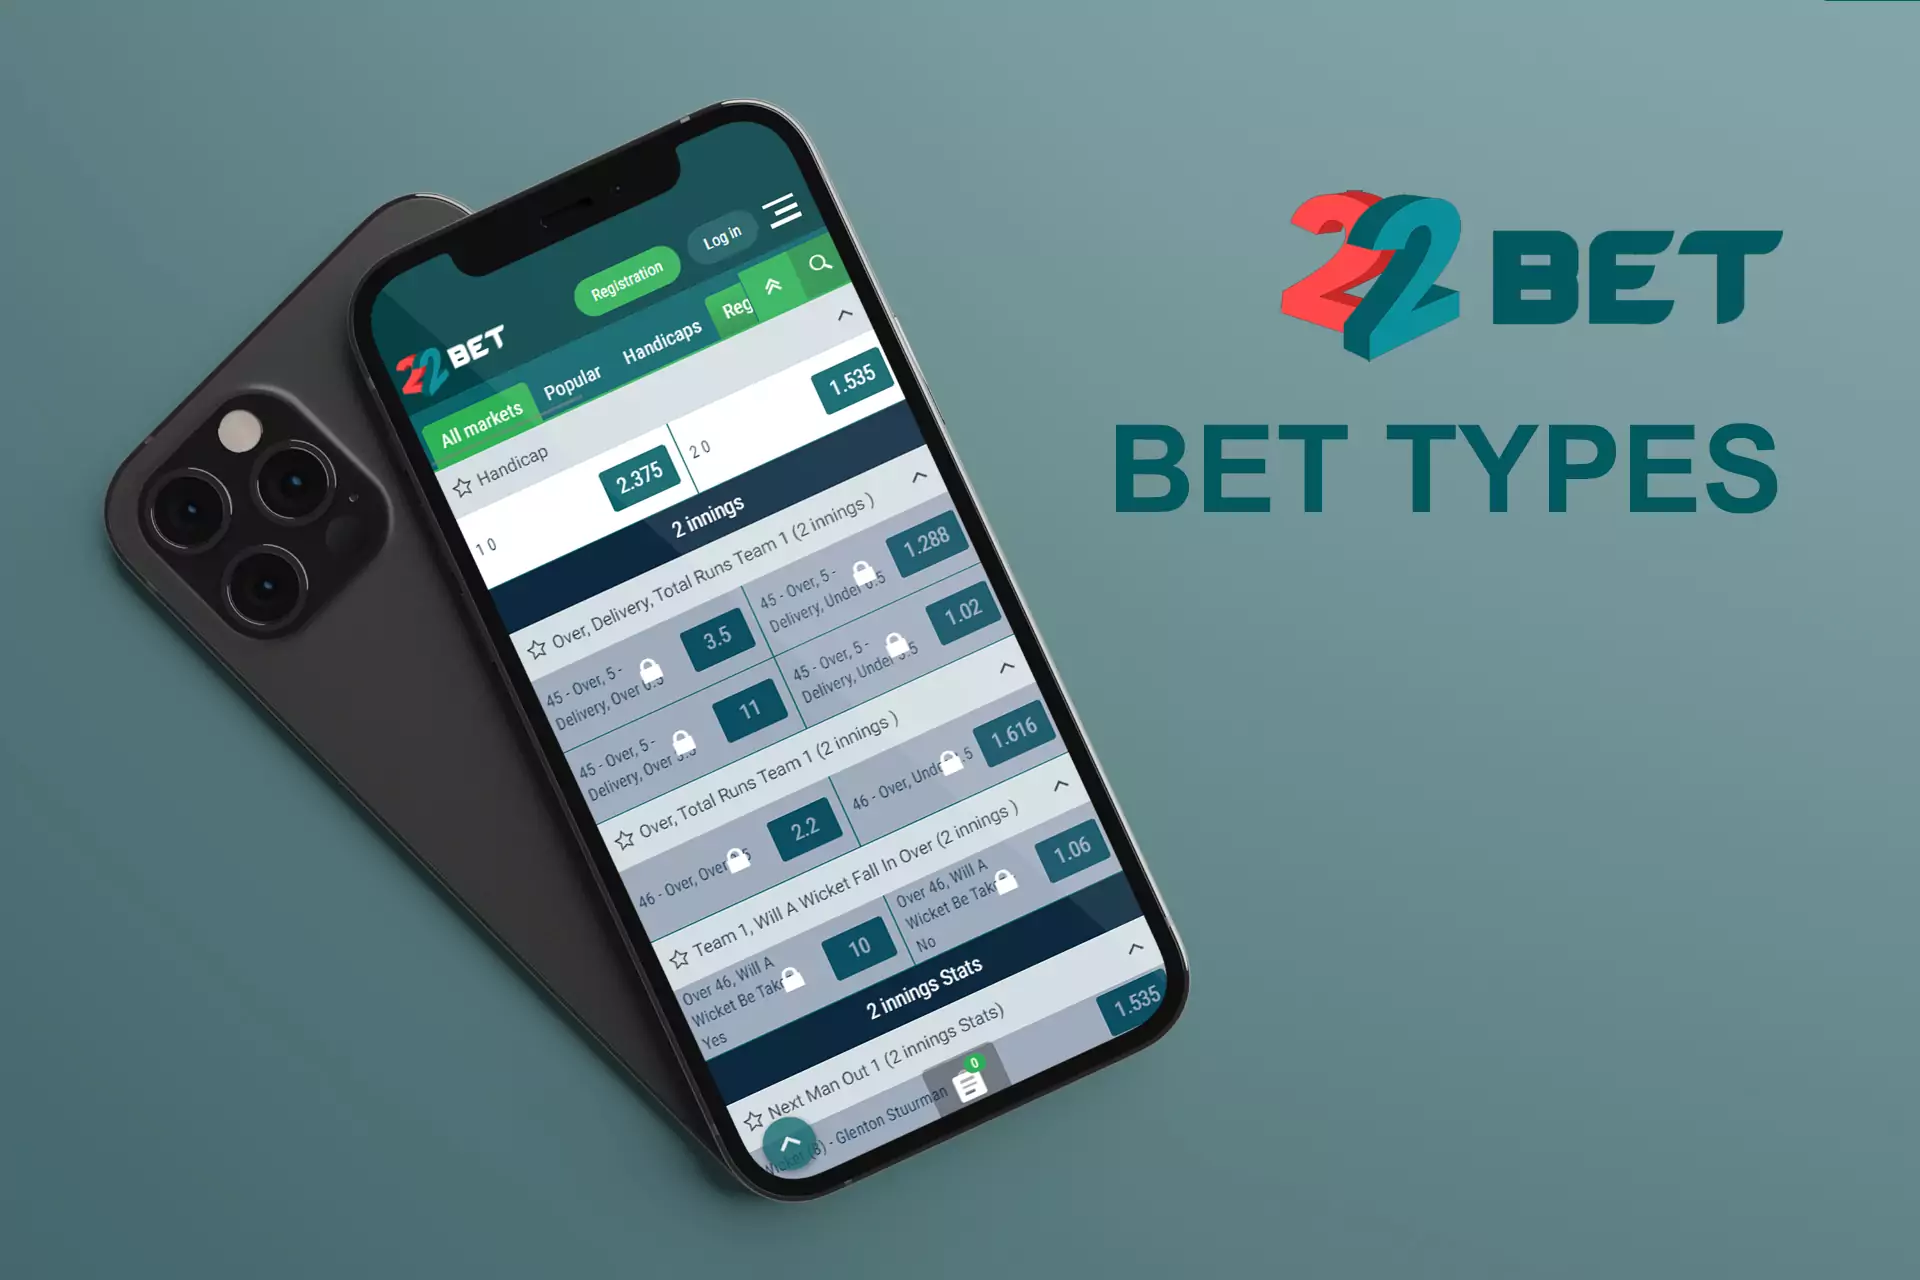 There are different types of sports betting available in the 22bet app.